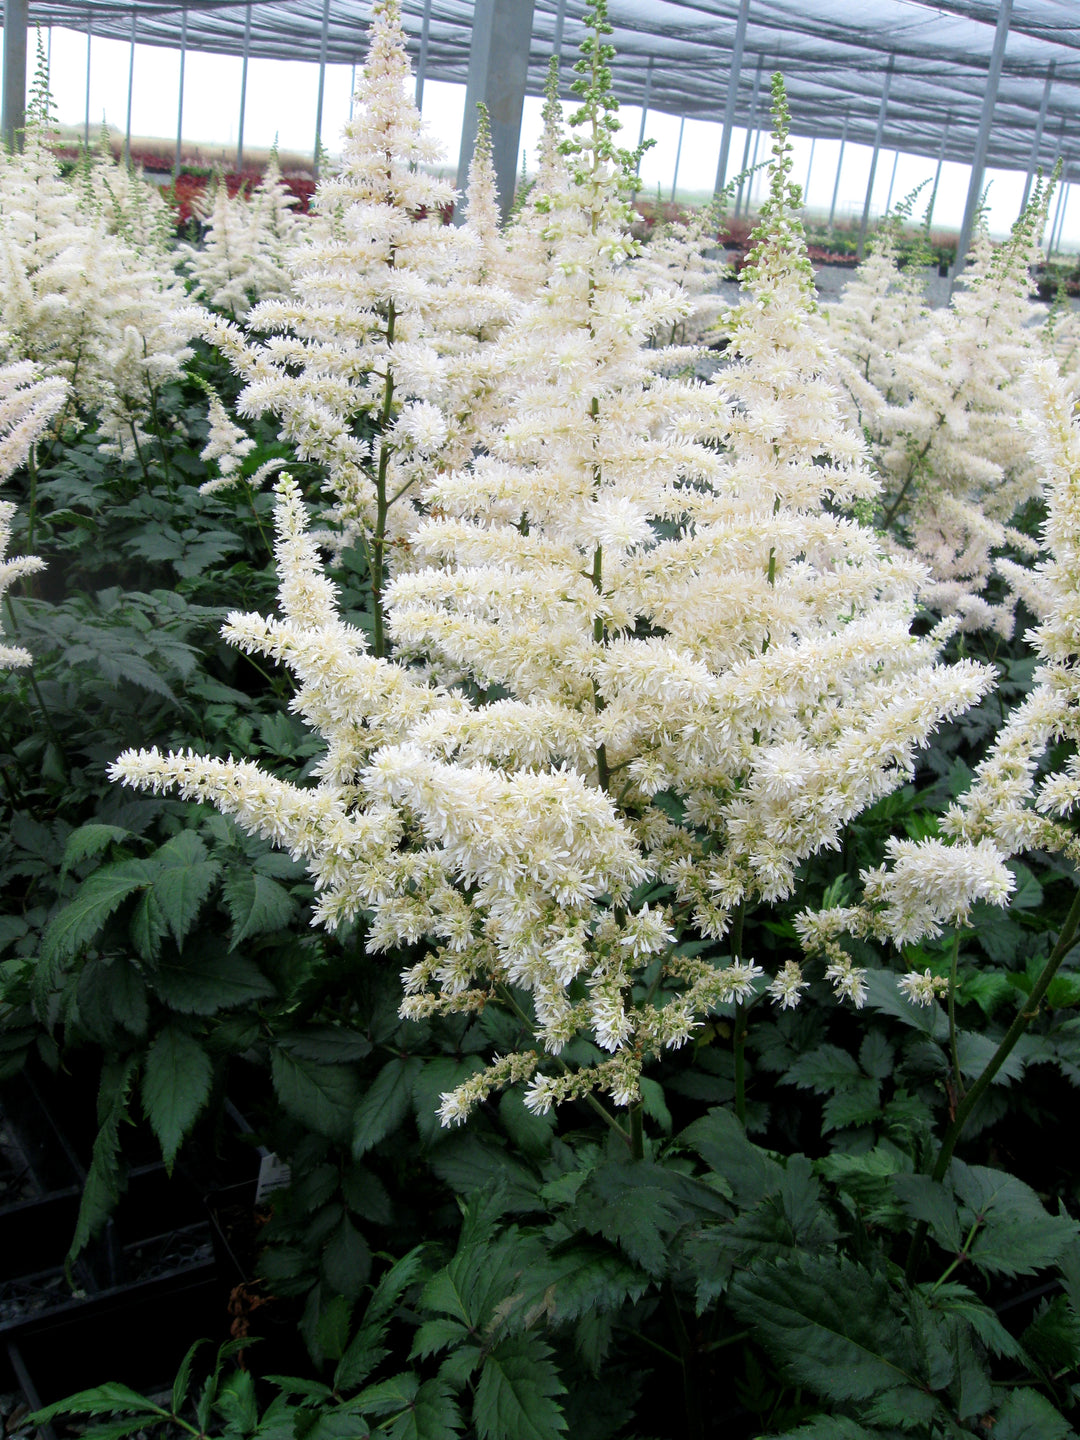 Astilbe 'Vision in White', close-up of flowers.